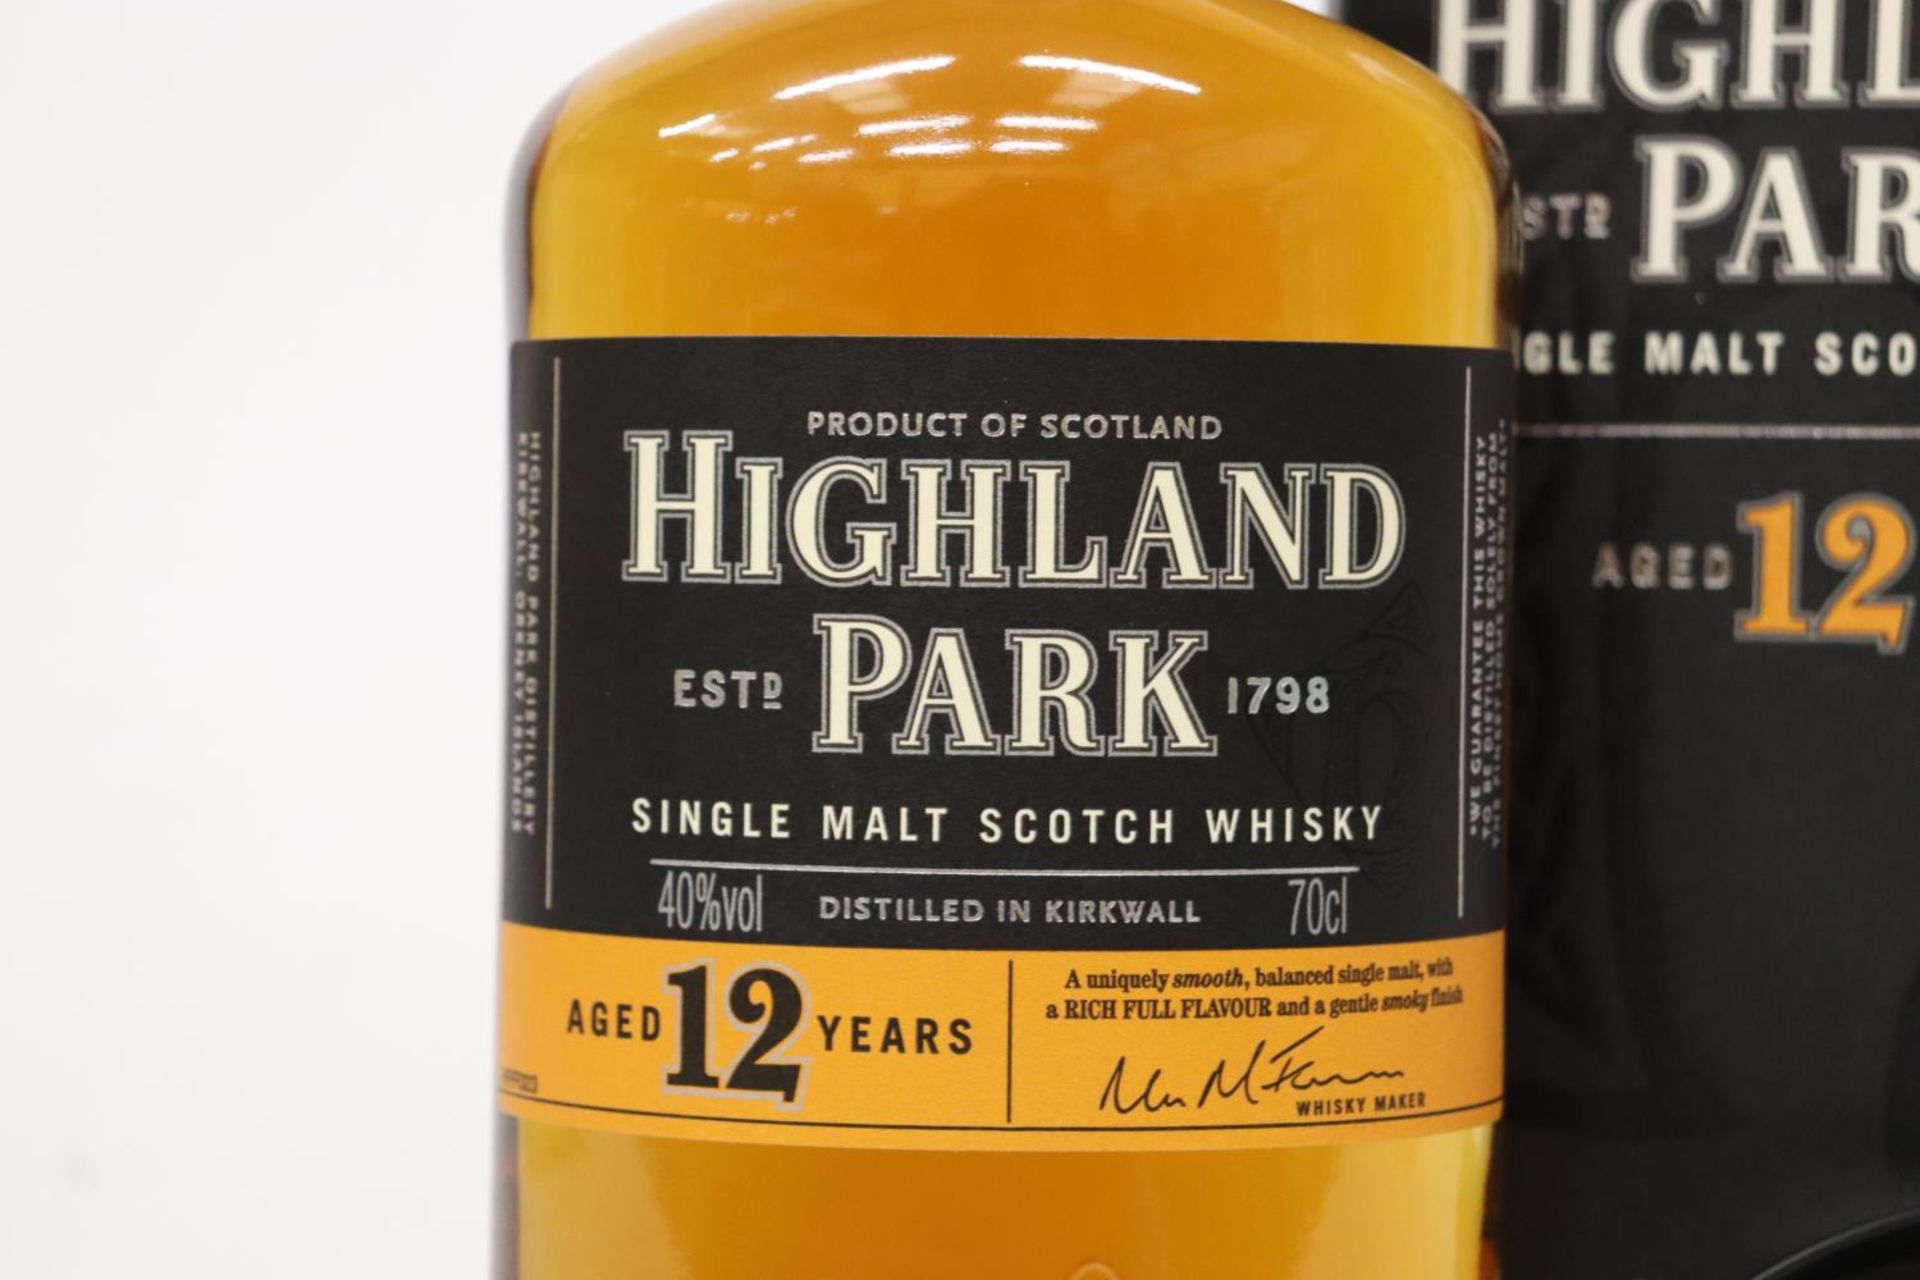 A BOTTLE OF HIGHLAND PARK 12 YEAR OLD WHISKY, BOXED - Image 2 of 5